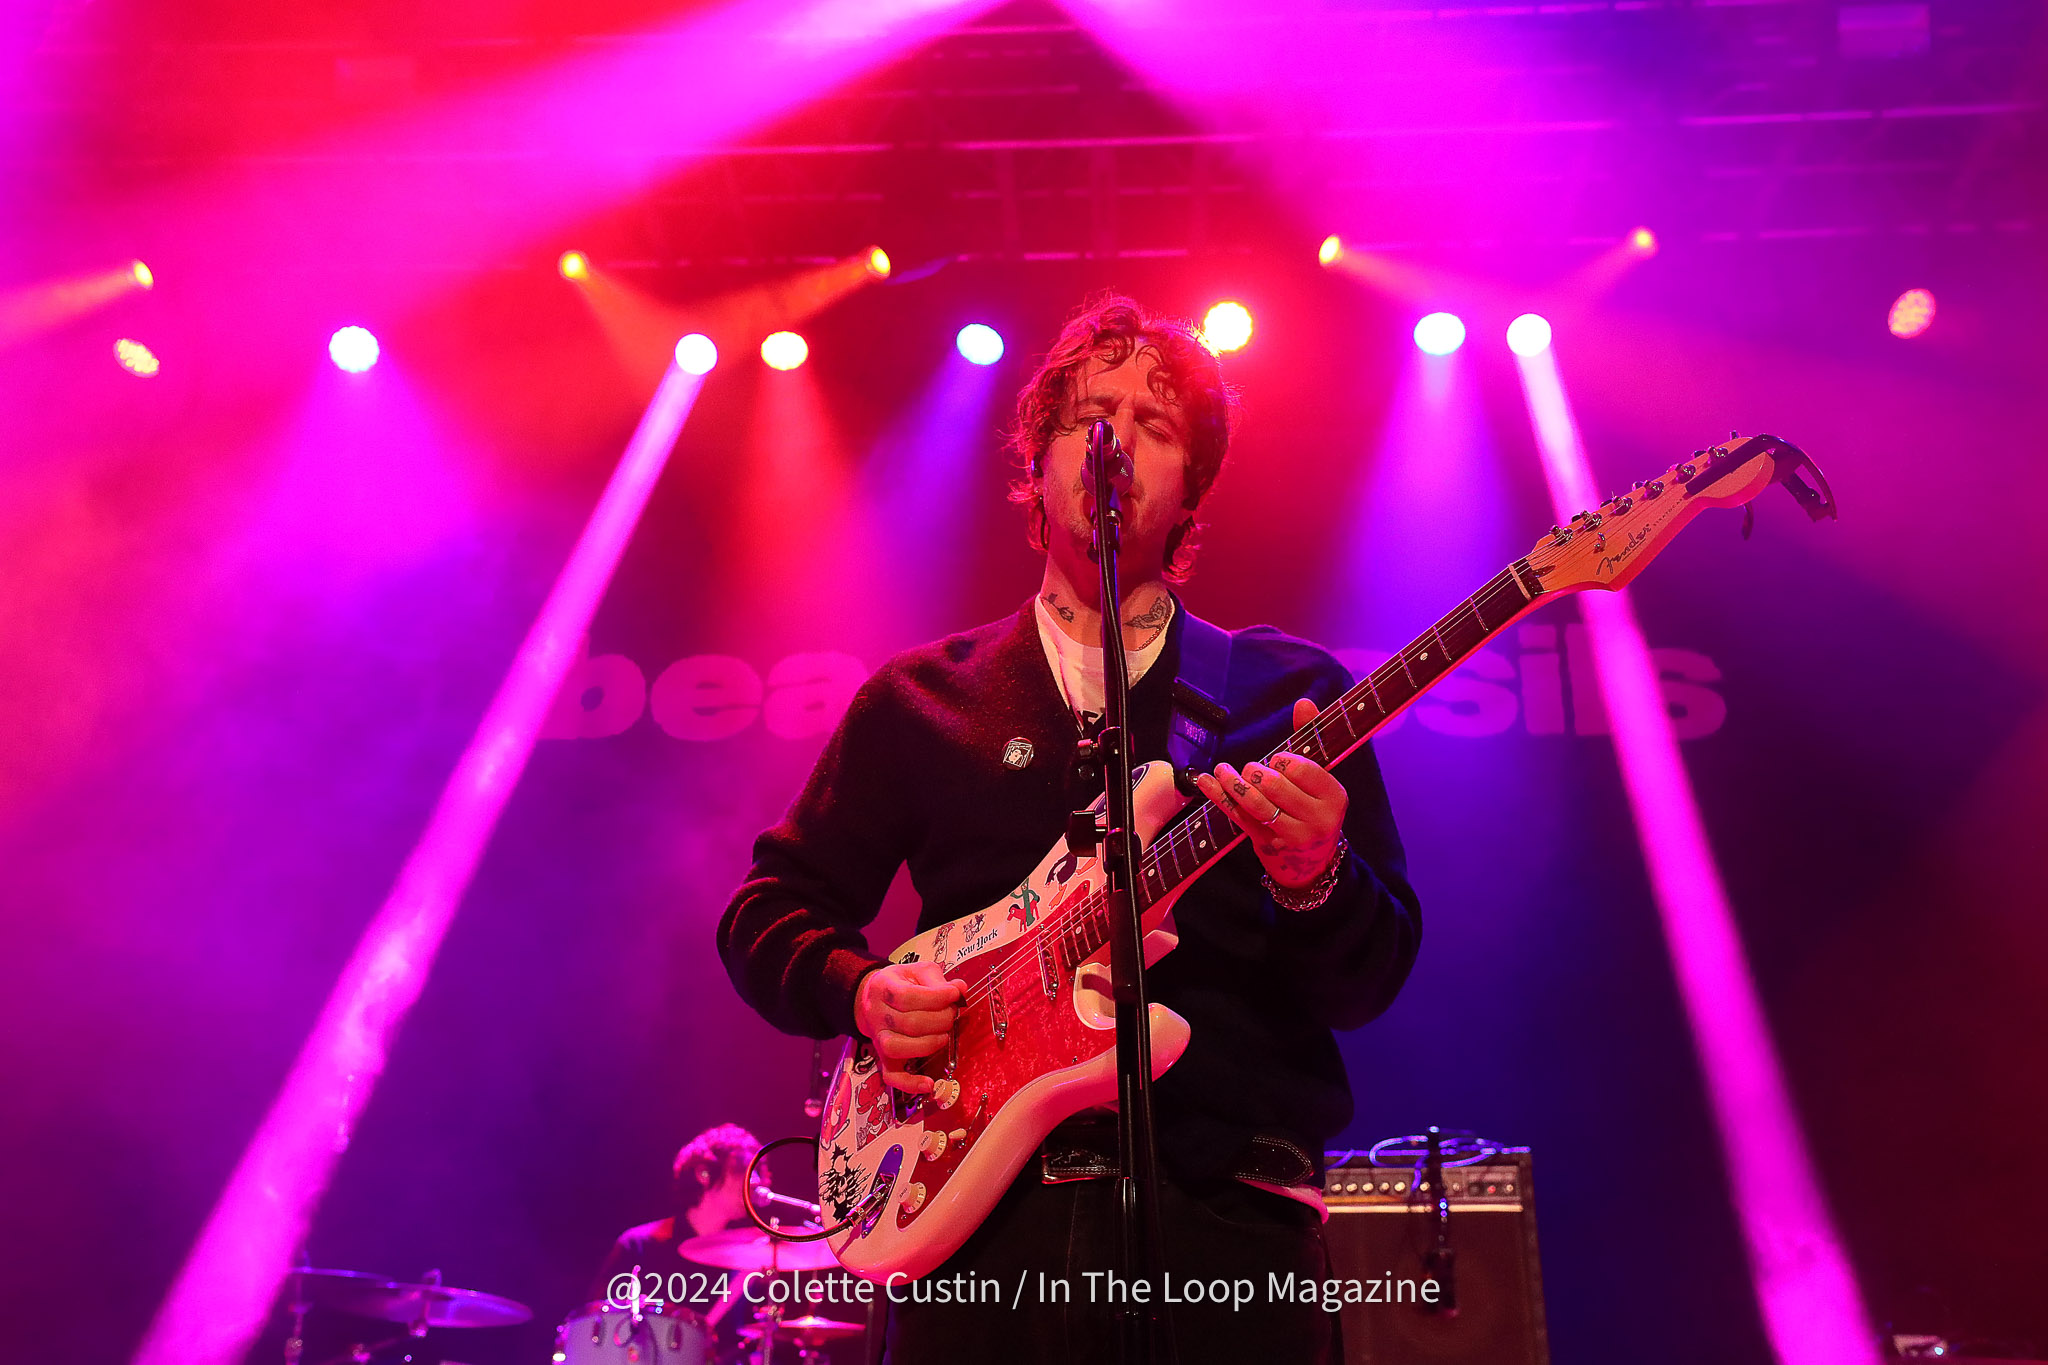 Two Acts Lead The Indie Rock Showcase At Chicago’s House of Blues As Beach Fossils and Nation of Language Double Up For Fun